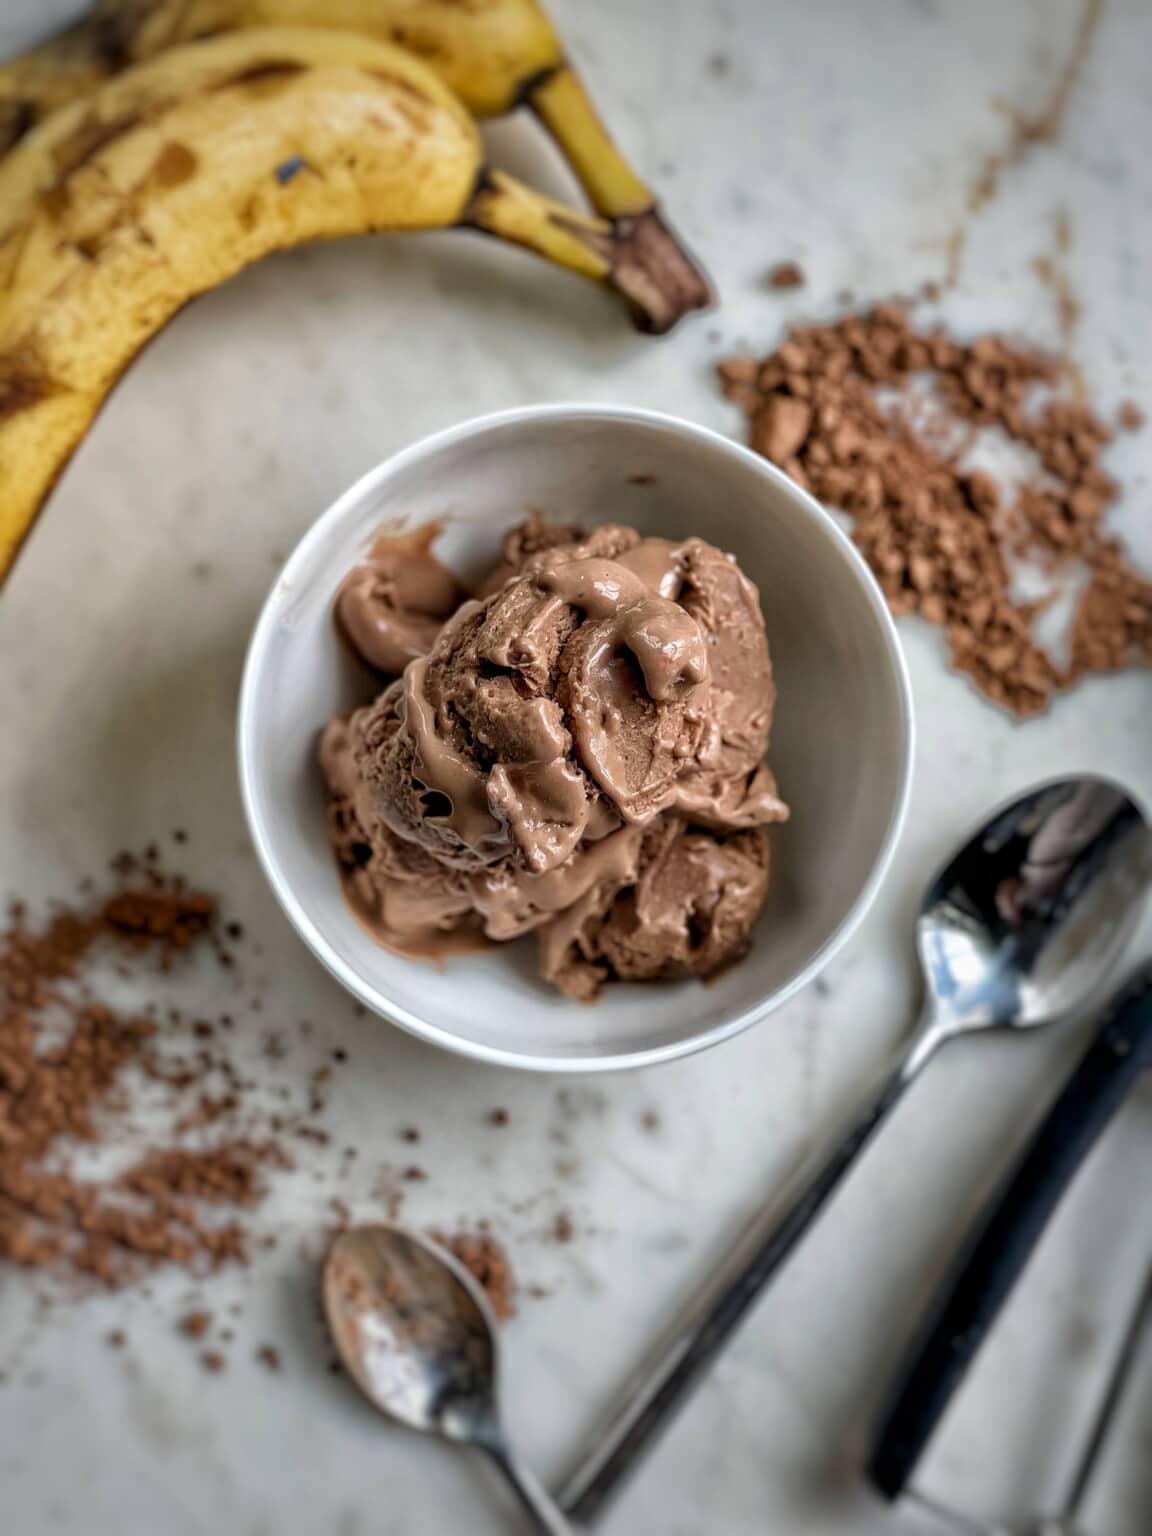 Viral Cottage Cheese Chocolate Peanut Butter Ice Cream